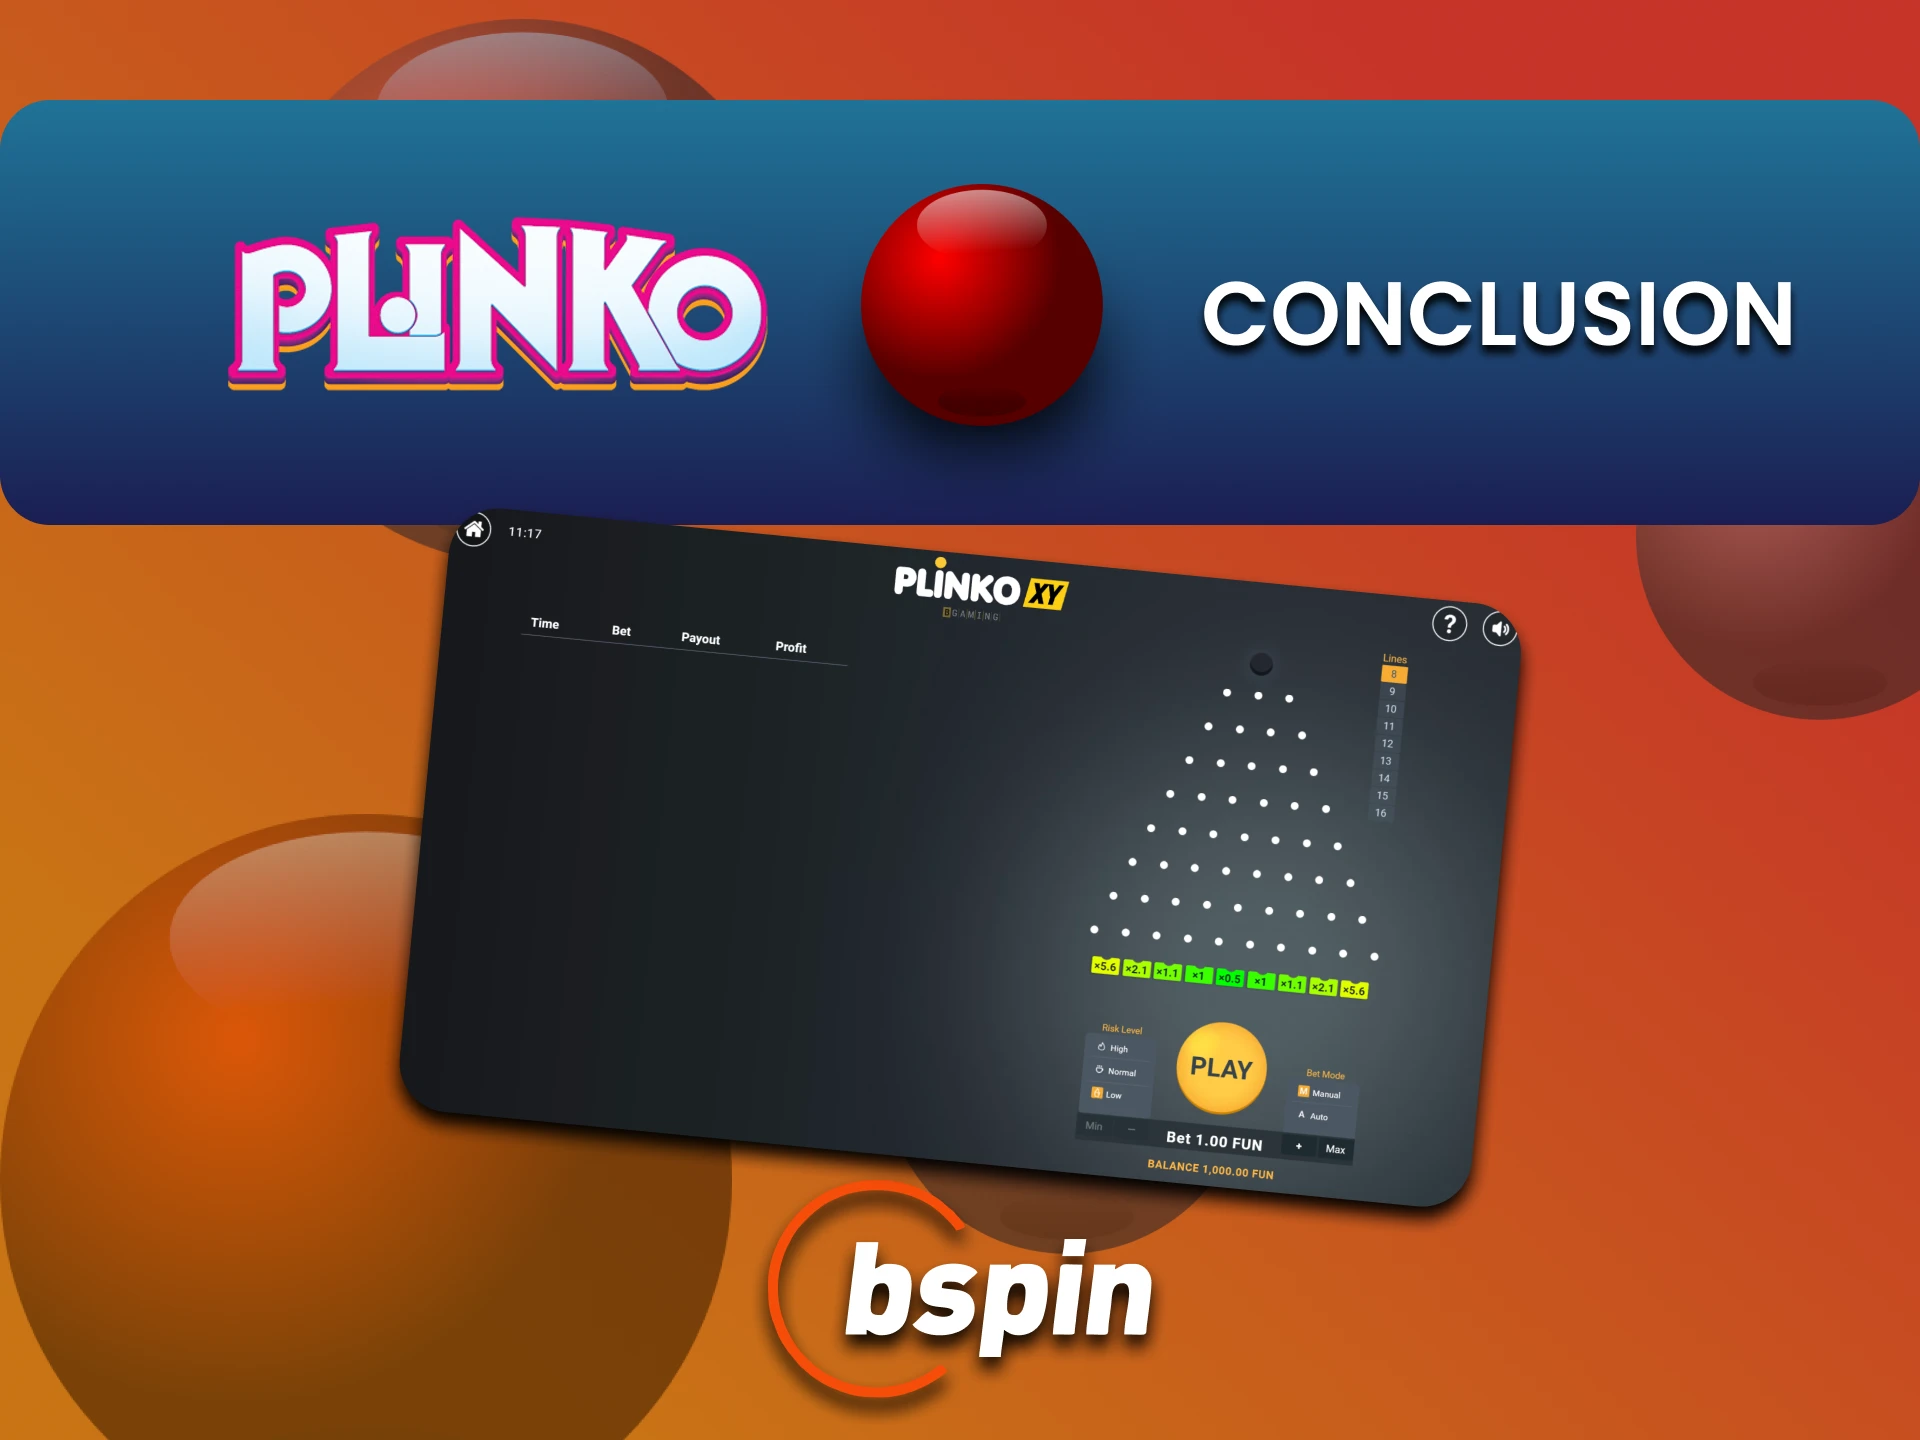 Bspin is the right choice for Plinko.